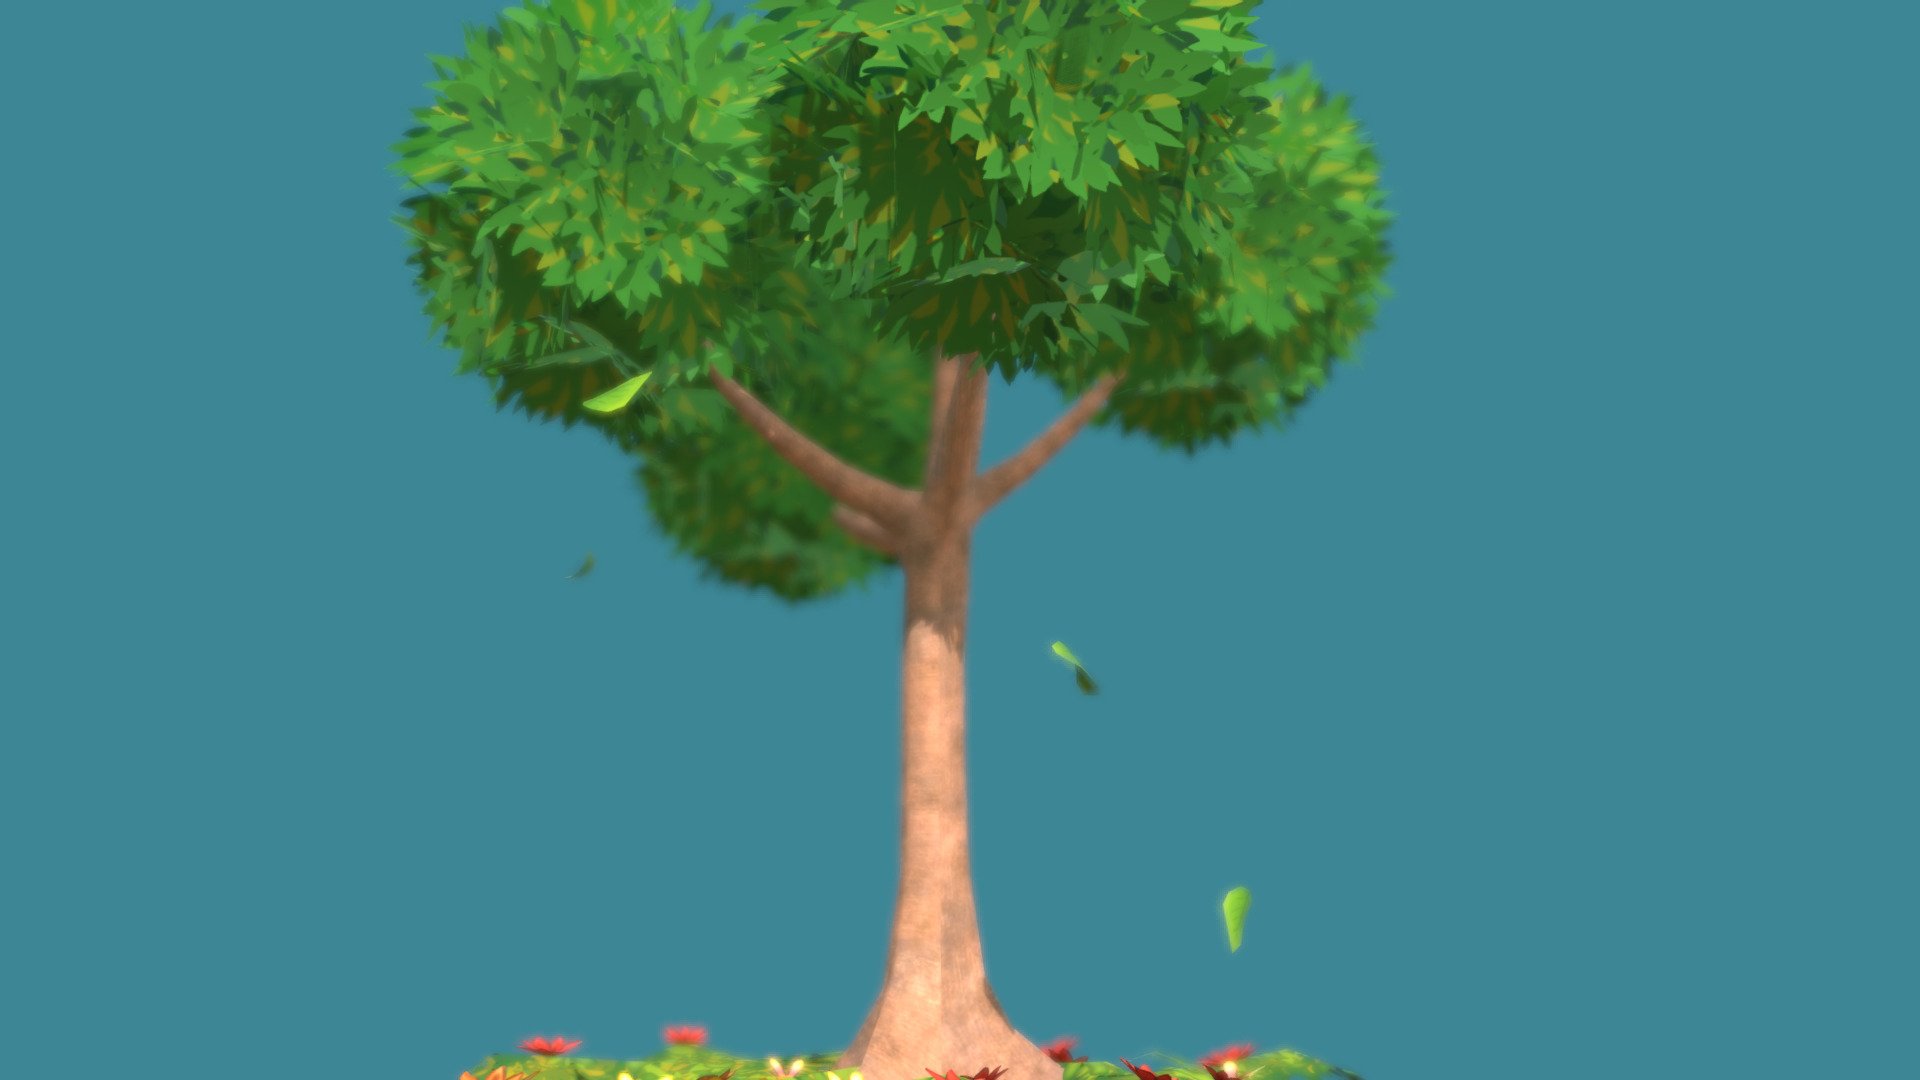 Mimic Breath VR - Master Thesis Prototype asset. The animated tree was implemented into a VR experience where the &ldquo;player